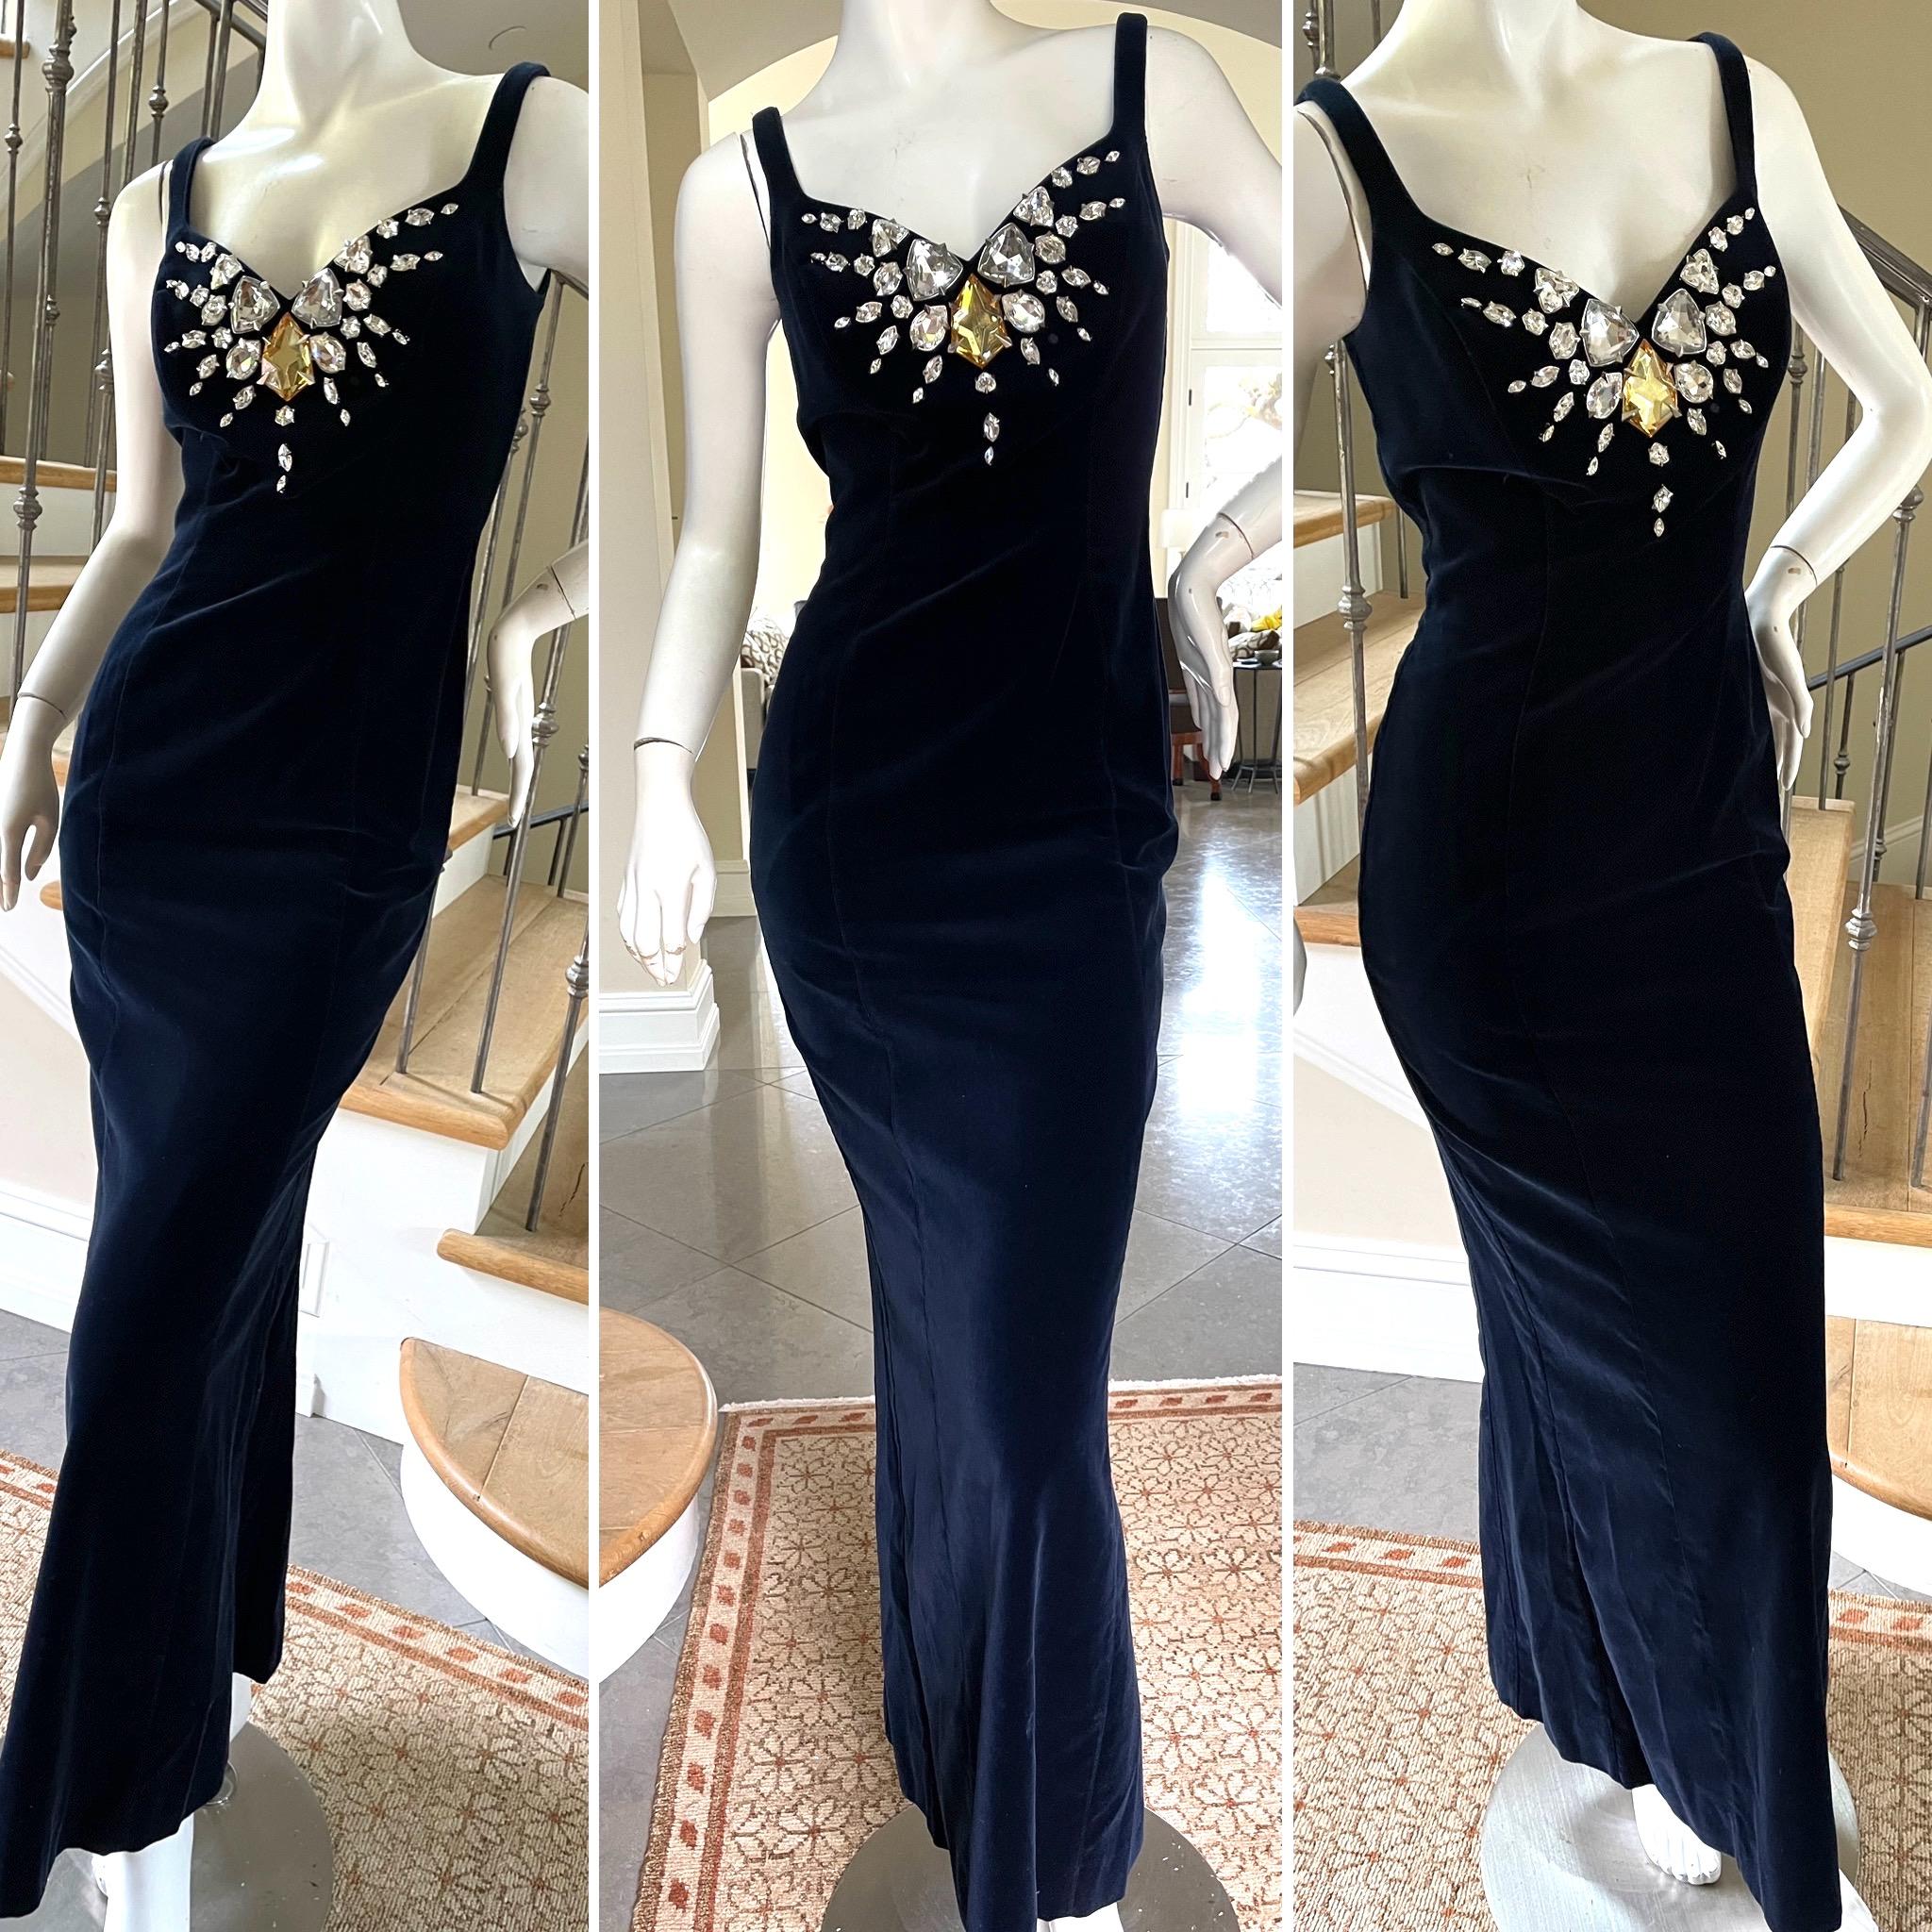 Thierry Mugler Rare Vintage Blue Velvet Evening Dress with Huge Jewel Accents
So beautiful, please use the zoom feature to see the details. 
 Size 38
 Bust 34